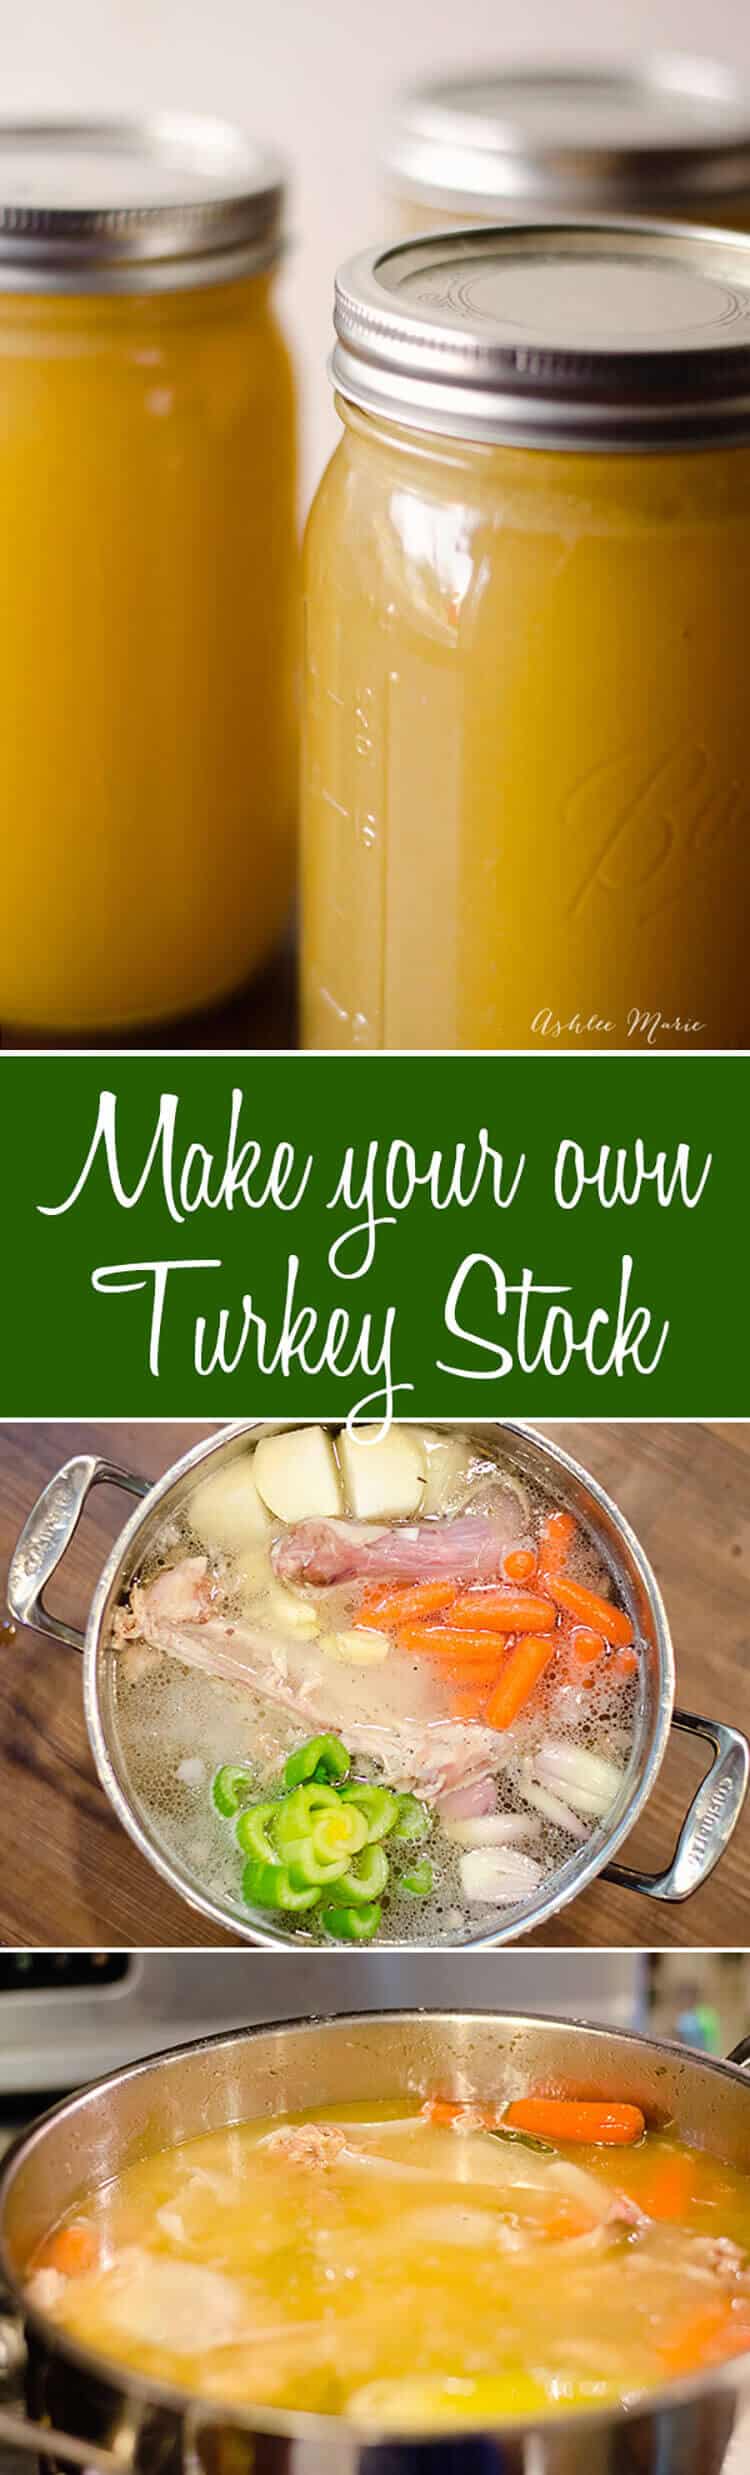 how to create your own turkey stock from your leftover turkey carcass